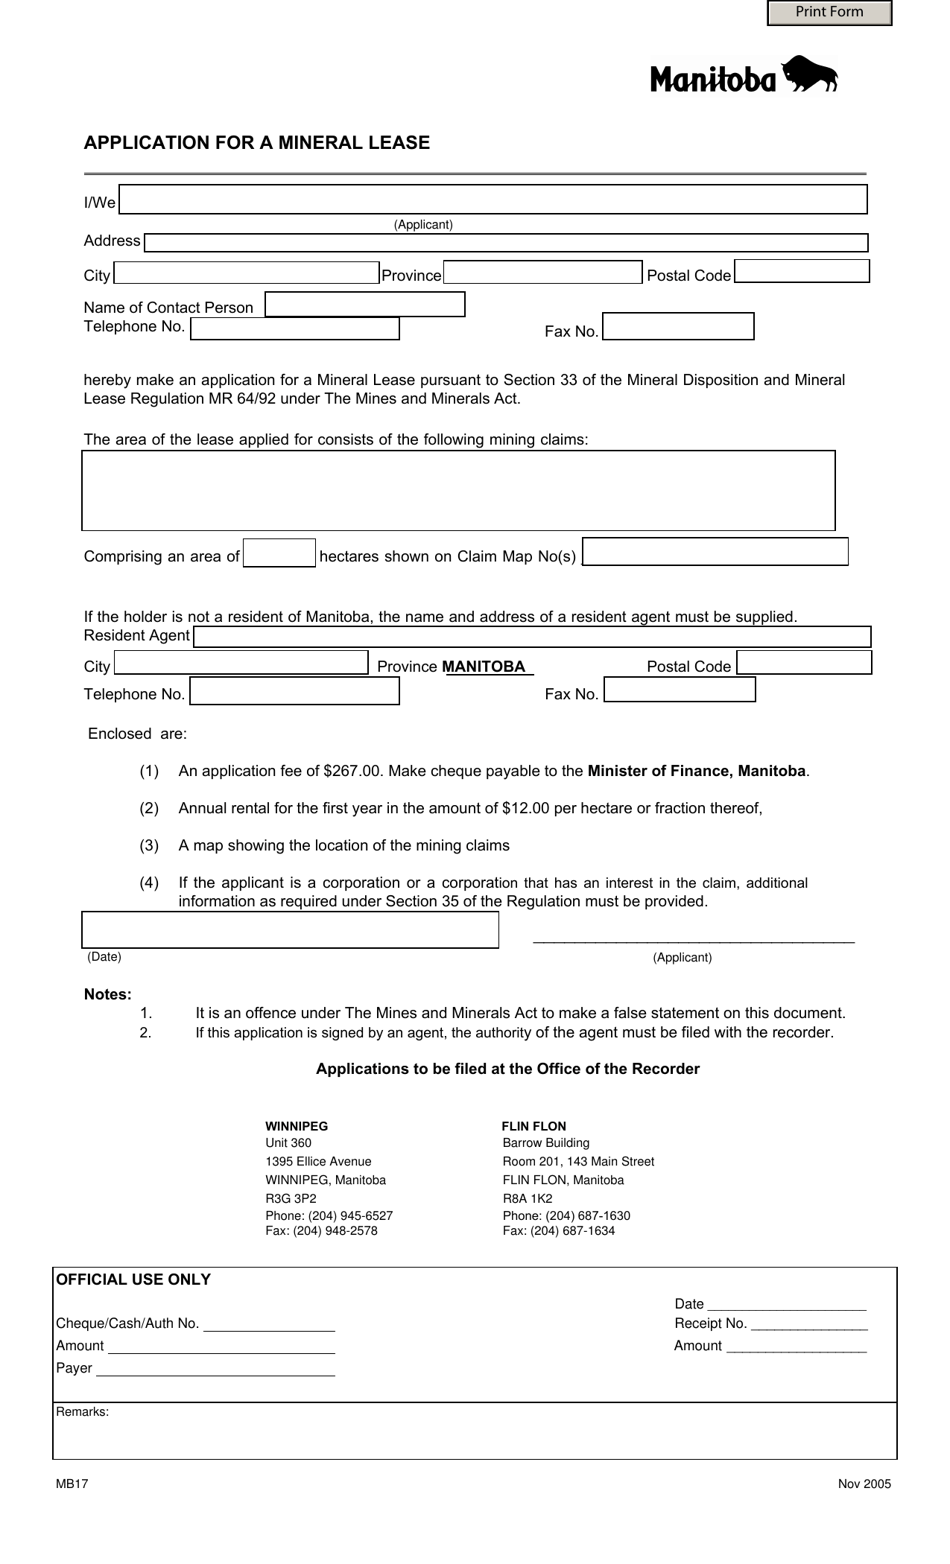 Form MB17 Application for a Mineral Lease - Manitoba, Canada, Page 1